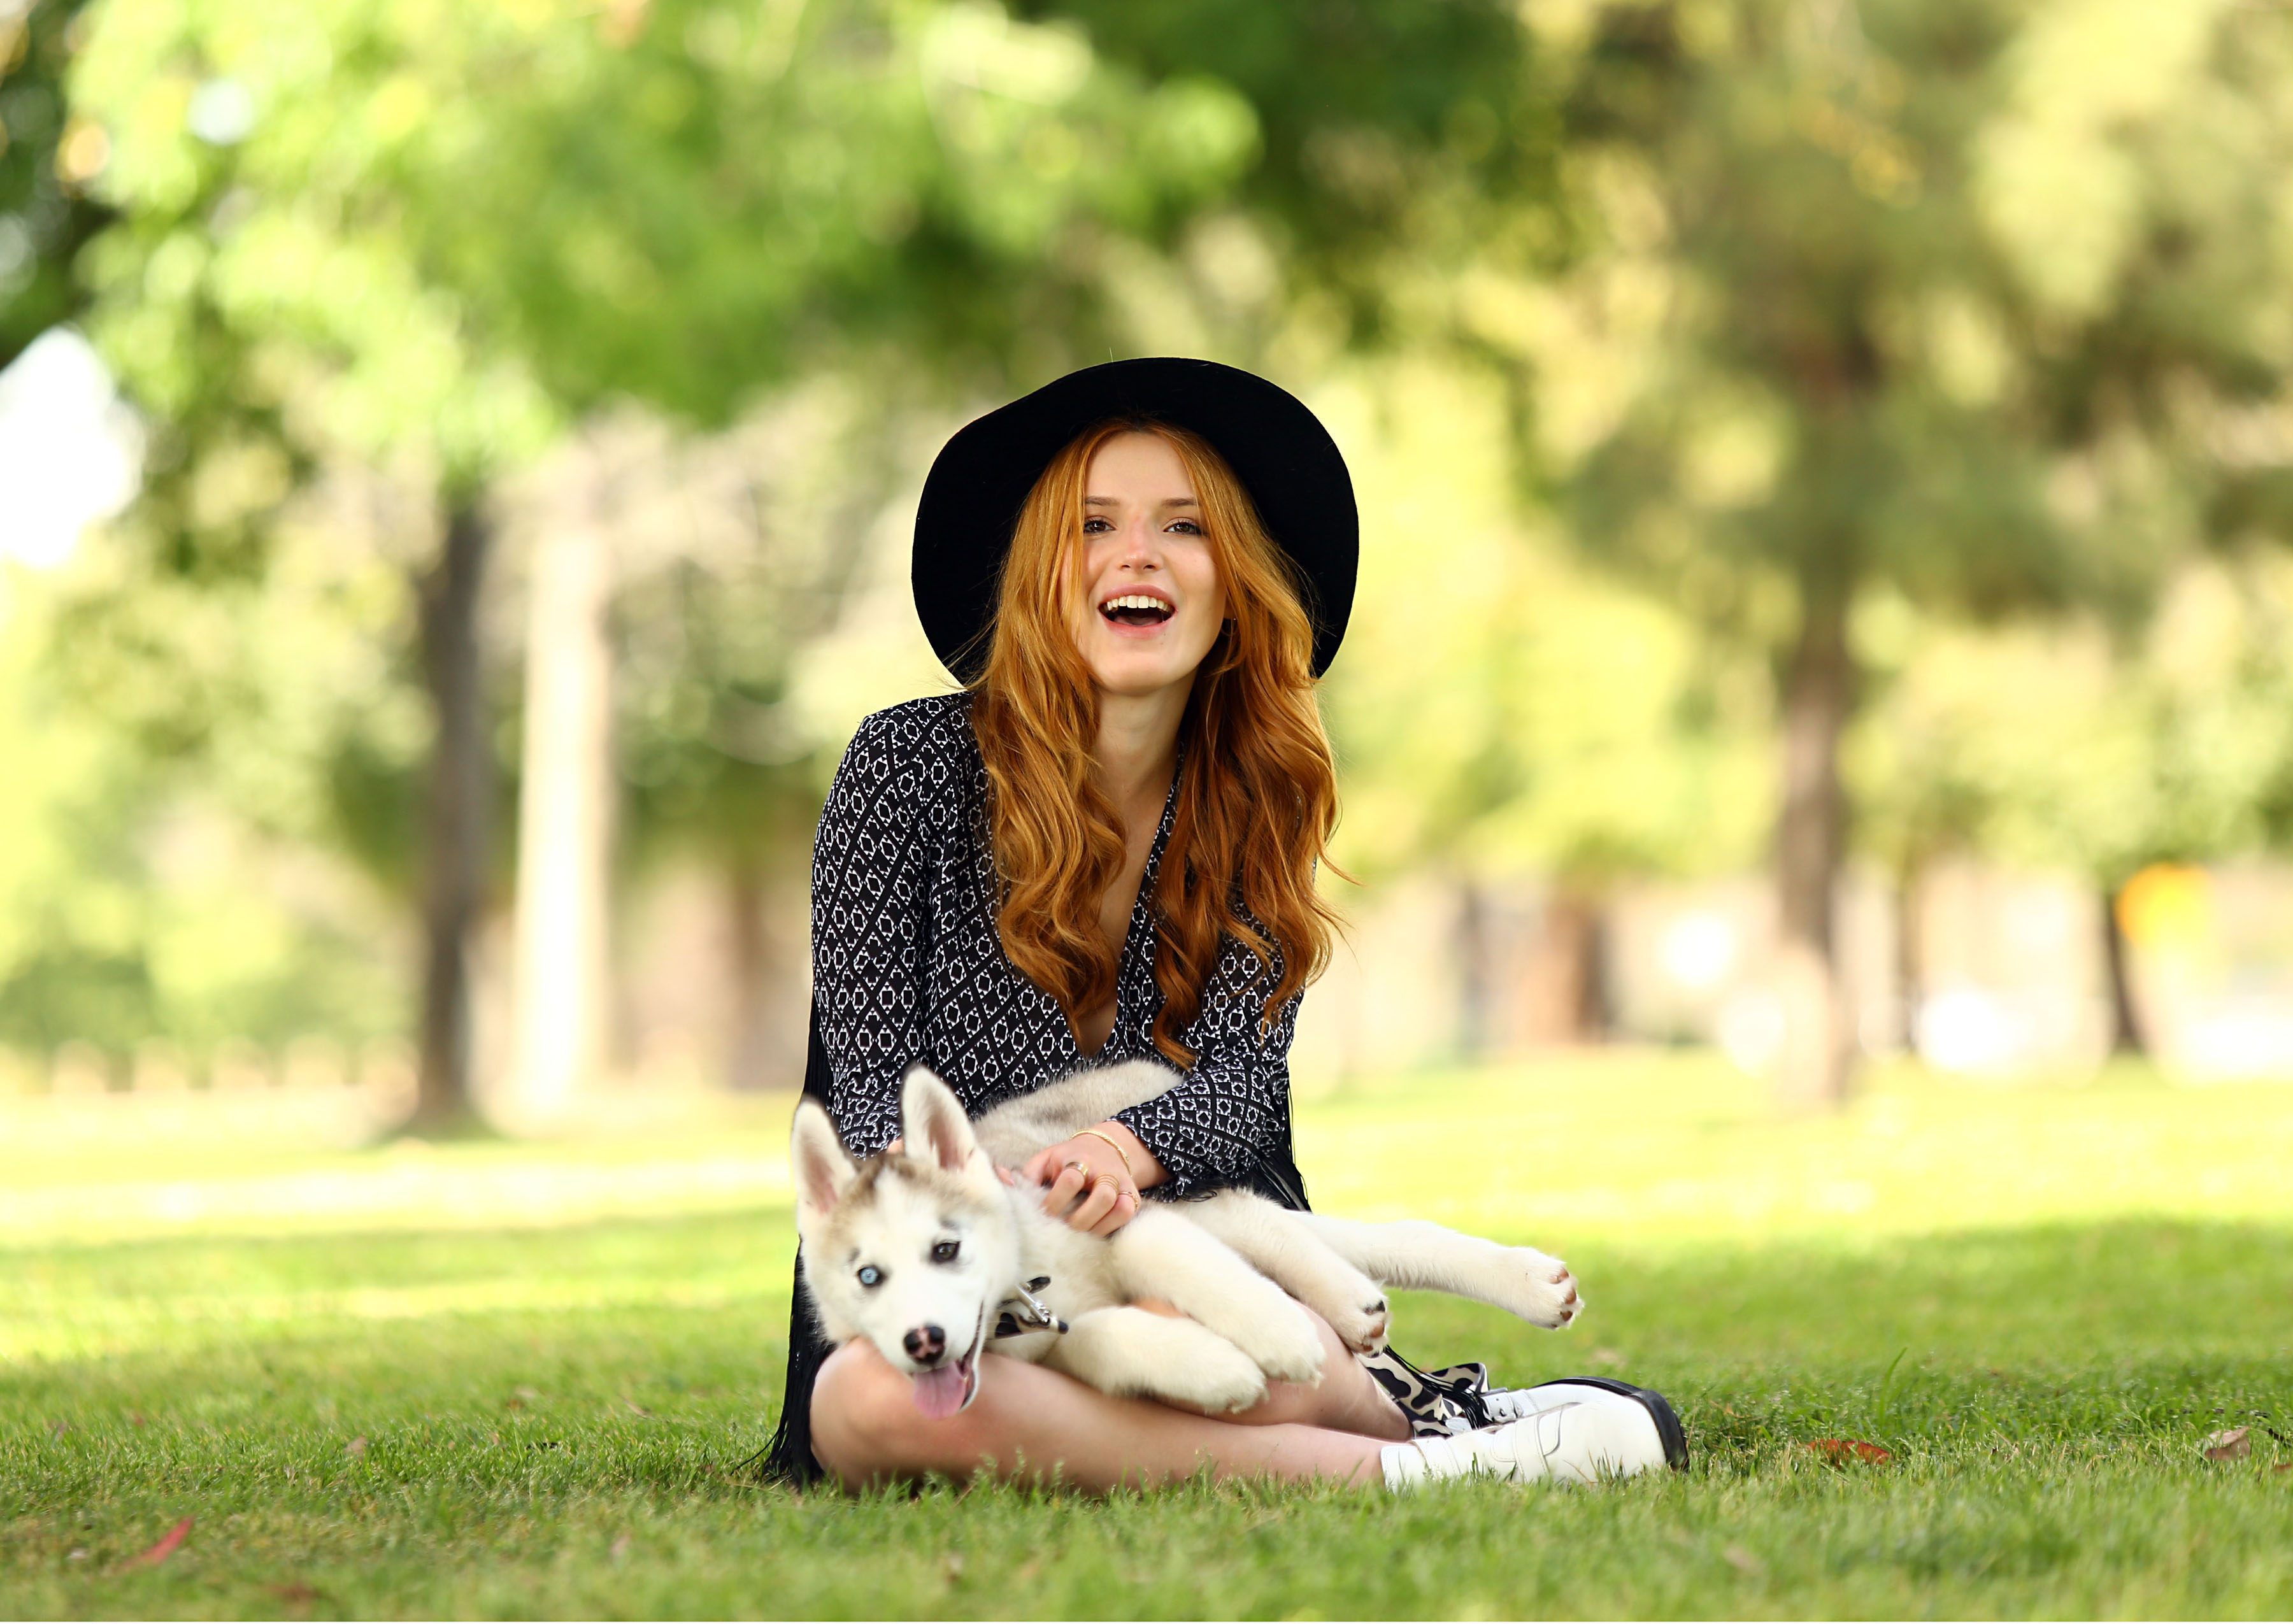 celebrity, bella thorne, actress, american, brown eyes, depth of field, dog, hat, puppy, redhead, smile